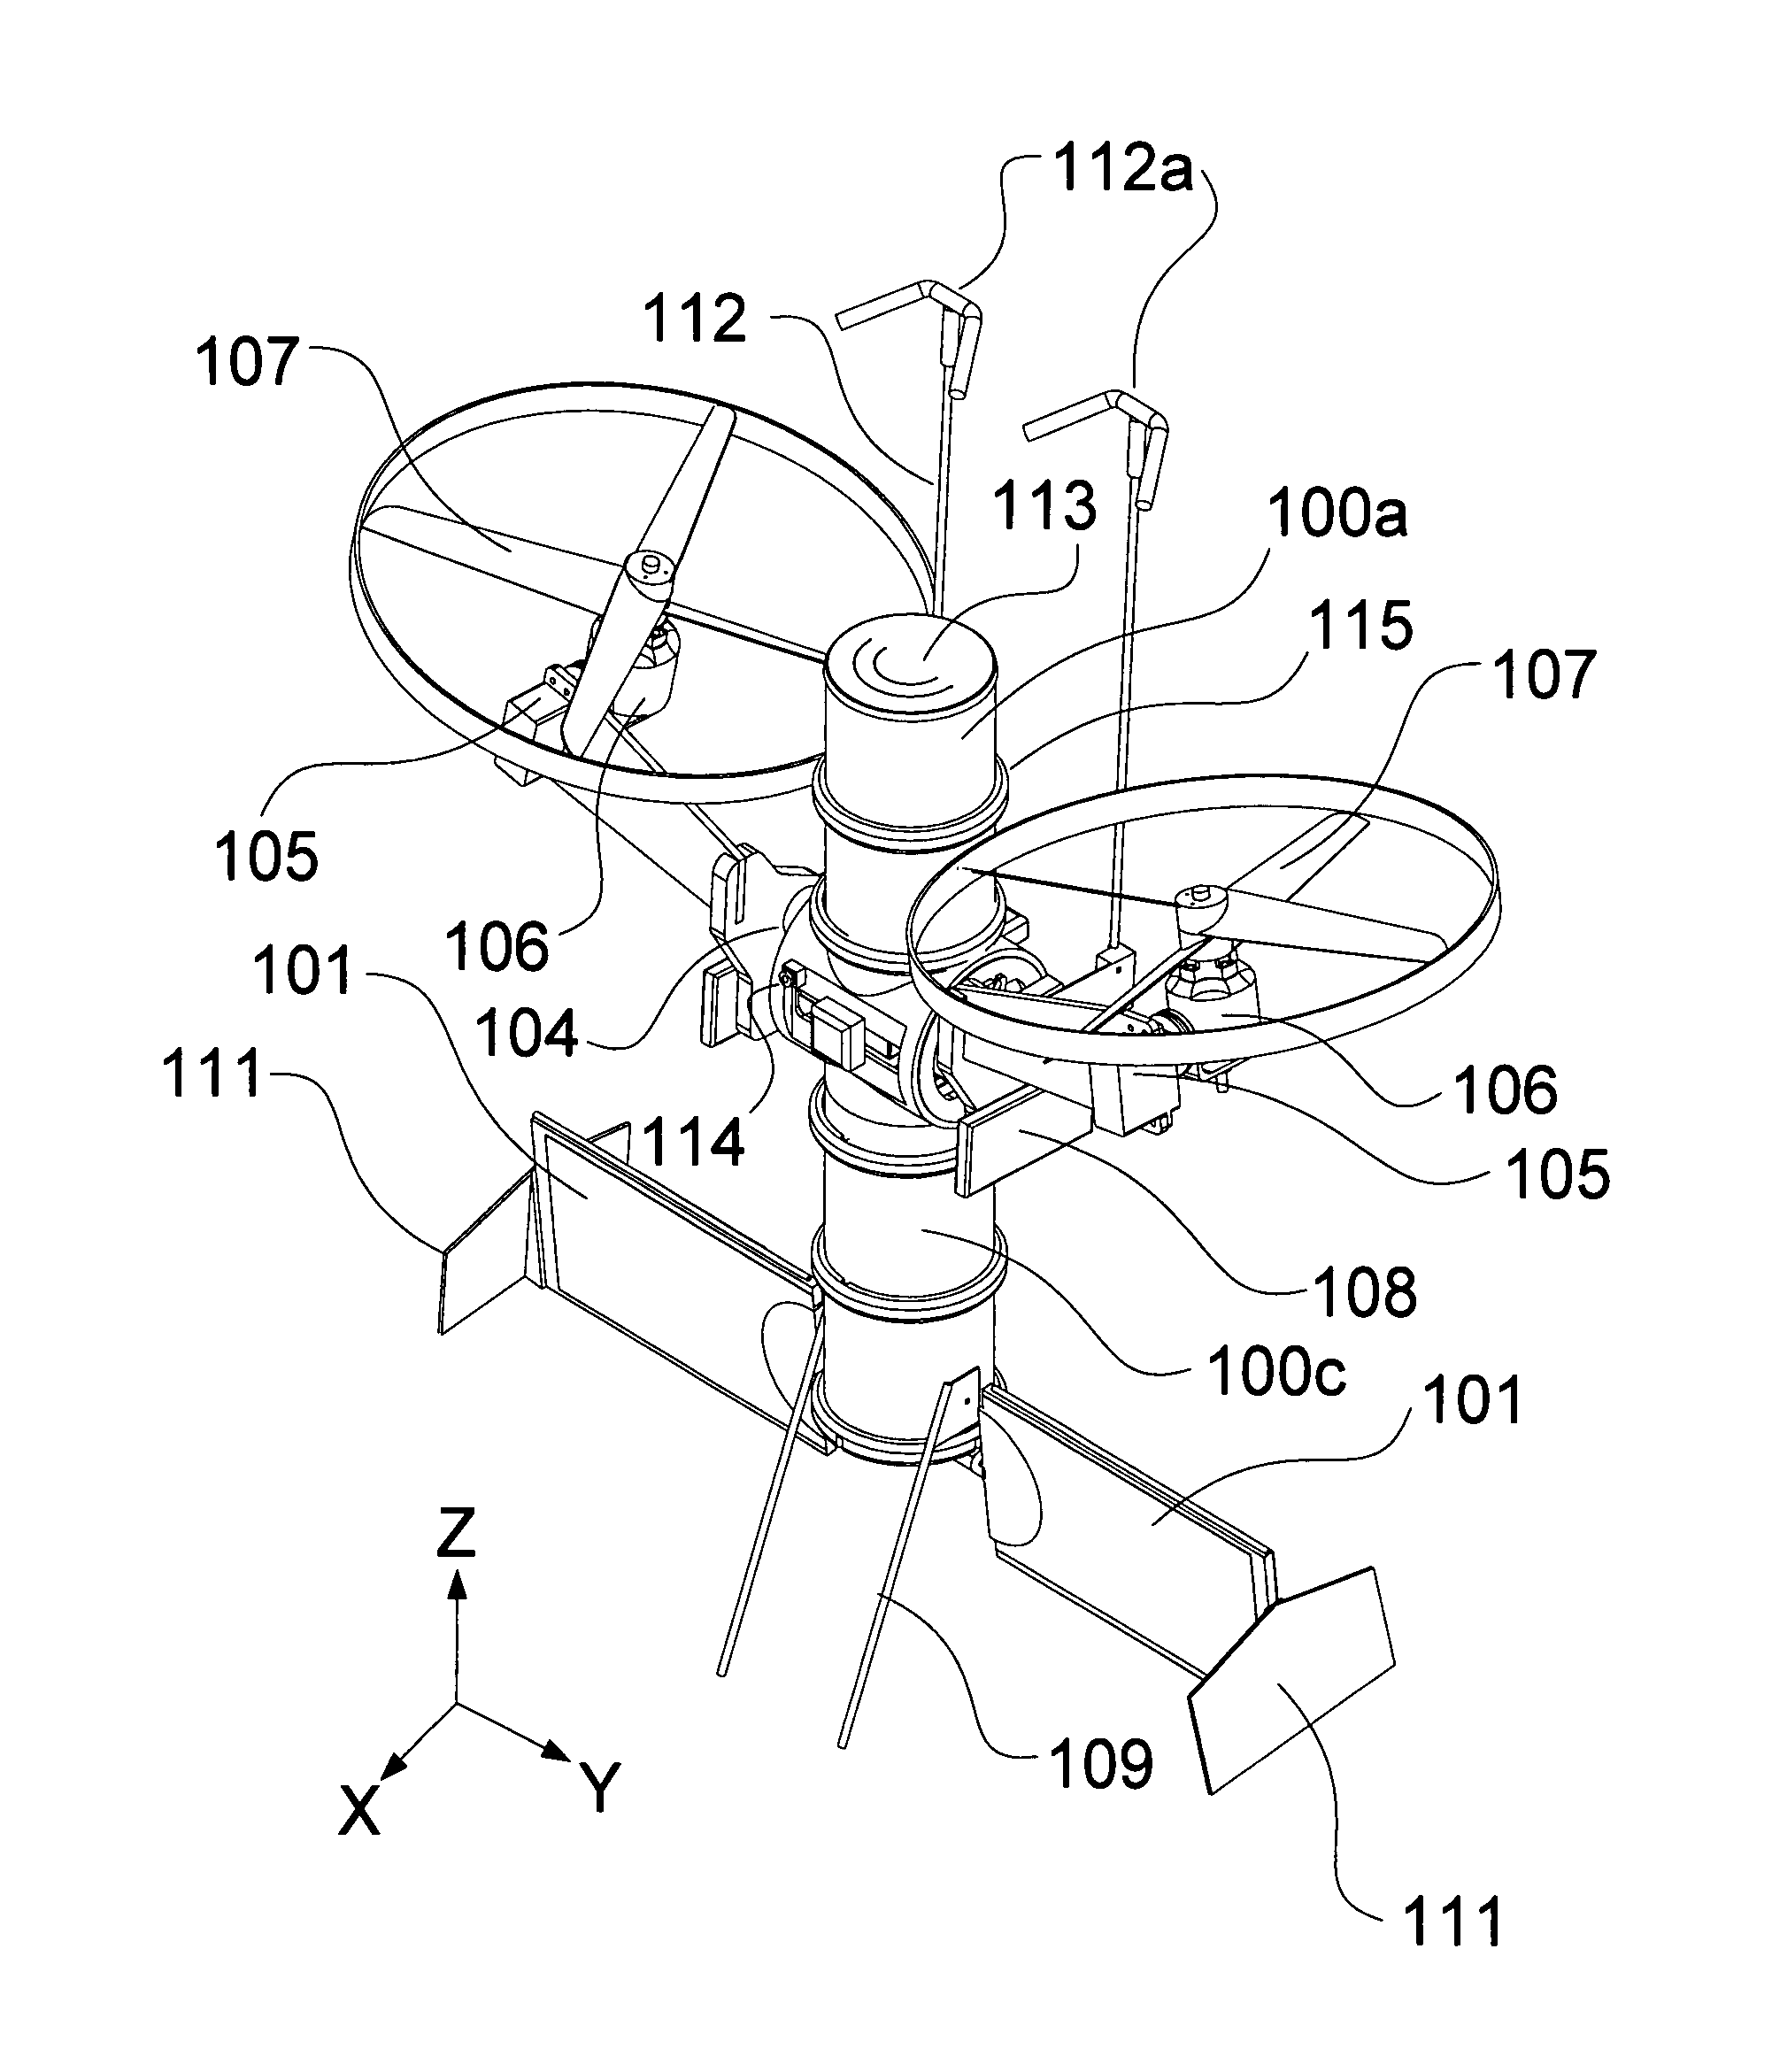 Insect-like micro air vehicle having perching, energy scavenging, crawling, and offensive payload capabilities